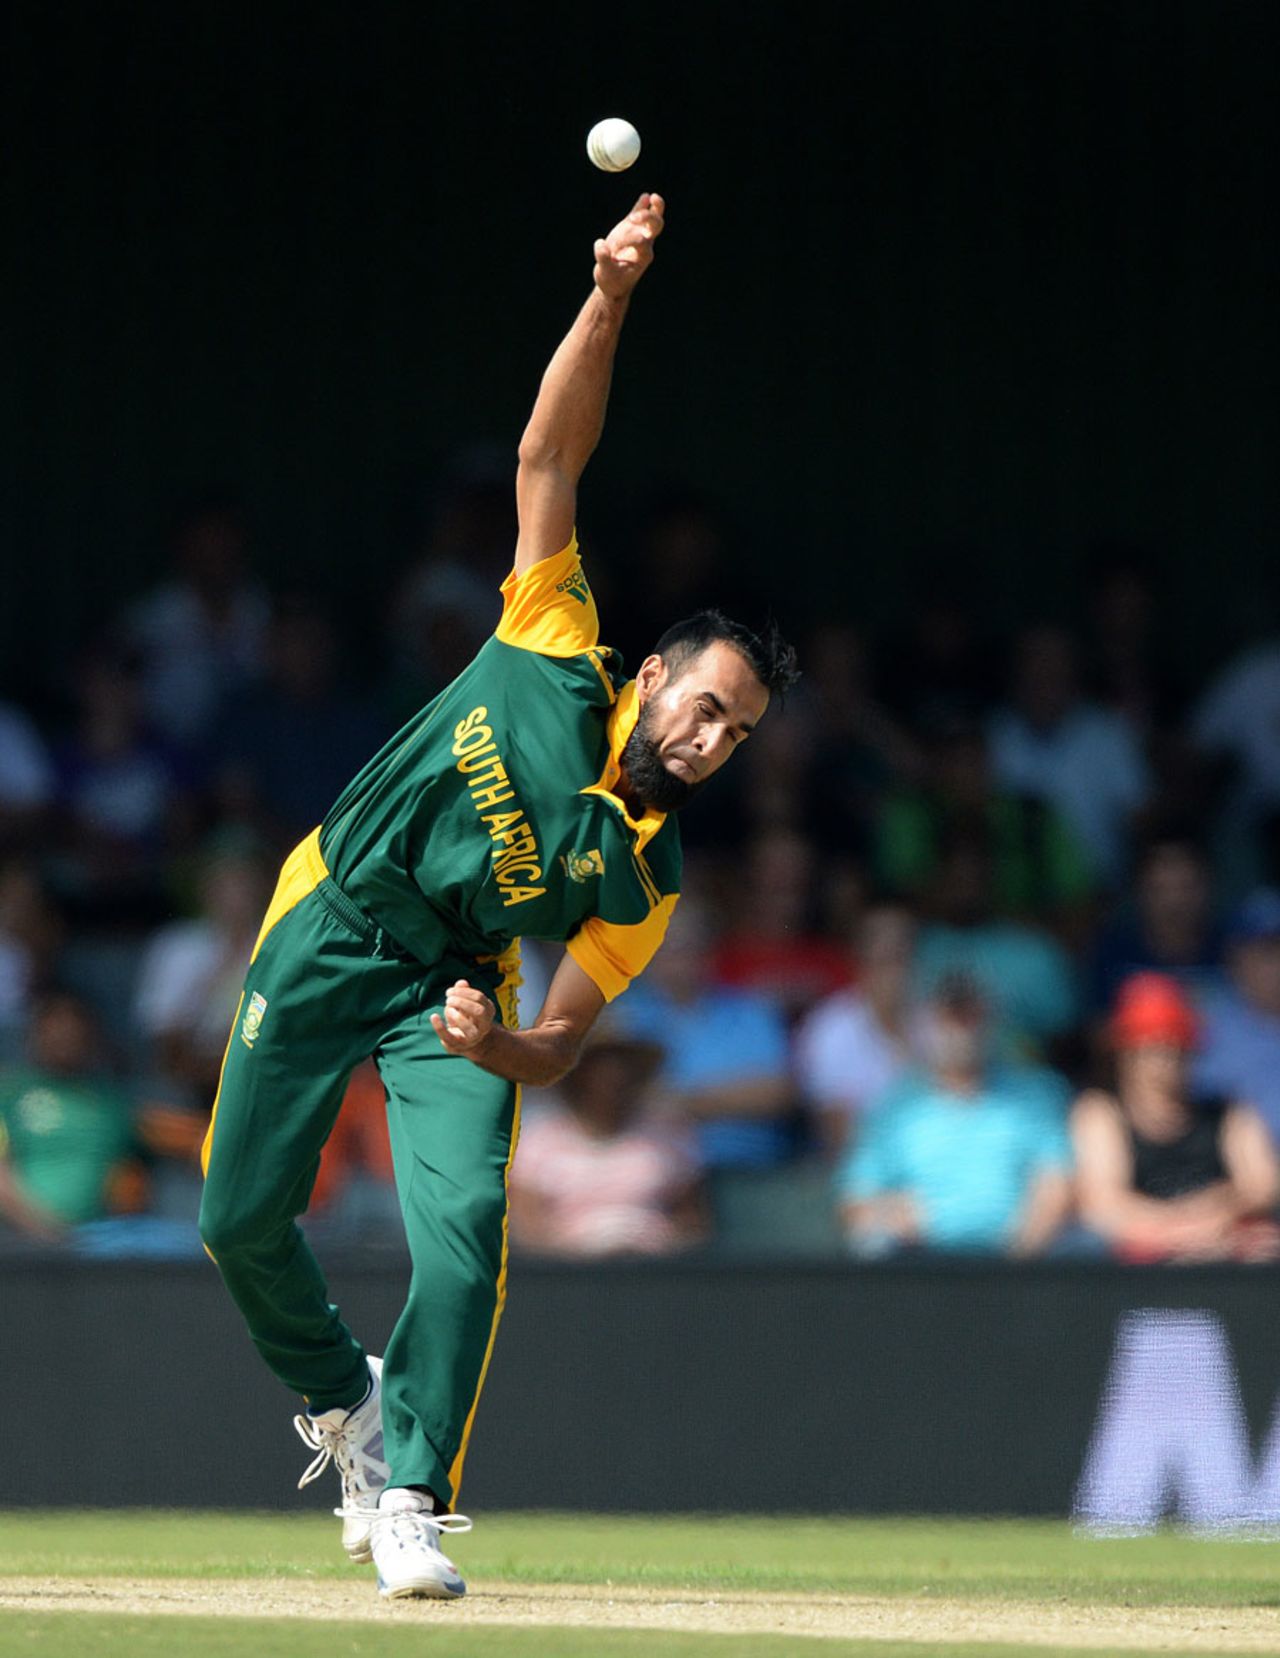 Imran Tahir helped himself to four wickets, South Africa v West Indies, 3rd ODI, East London, January 21, 2015